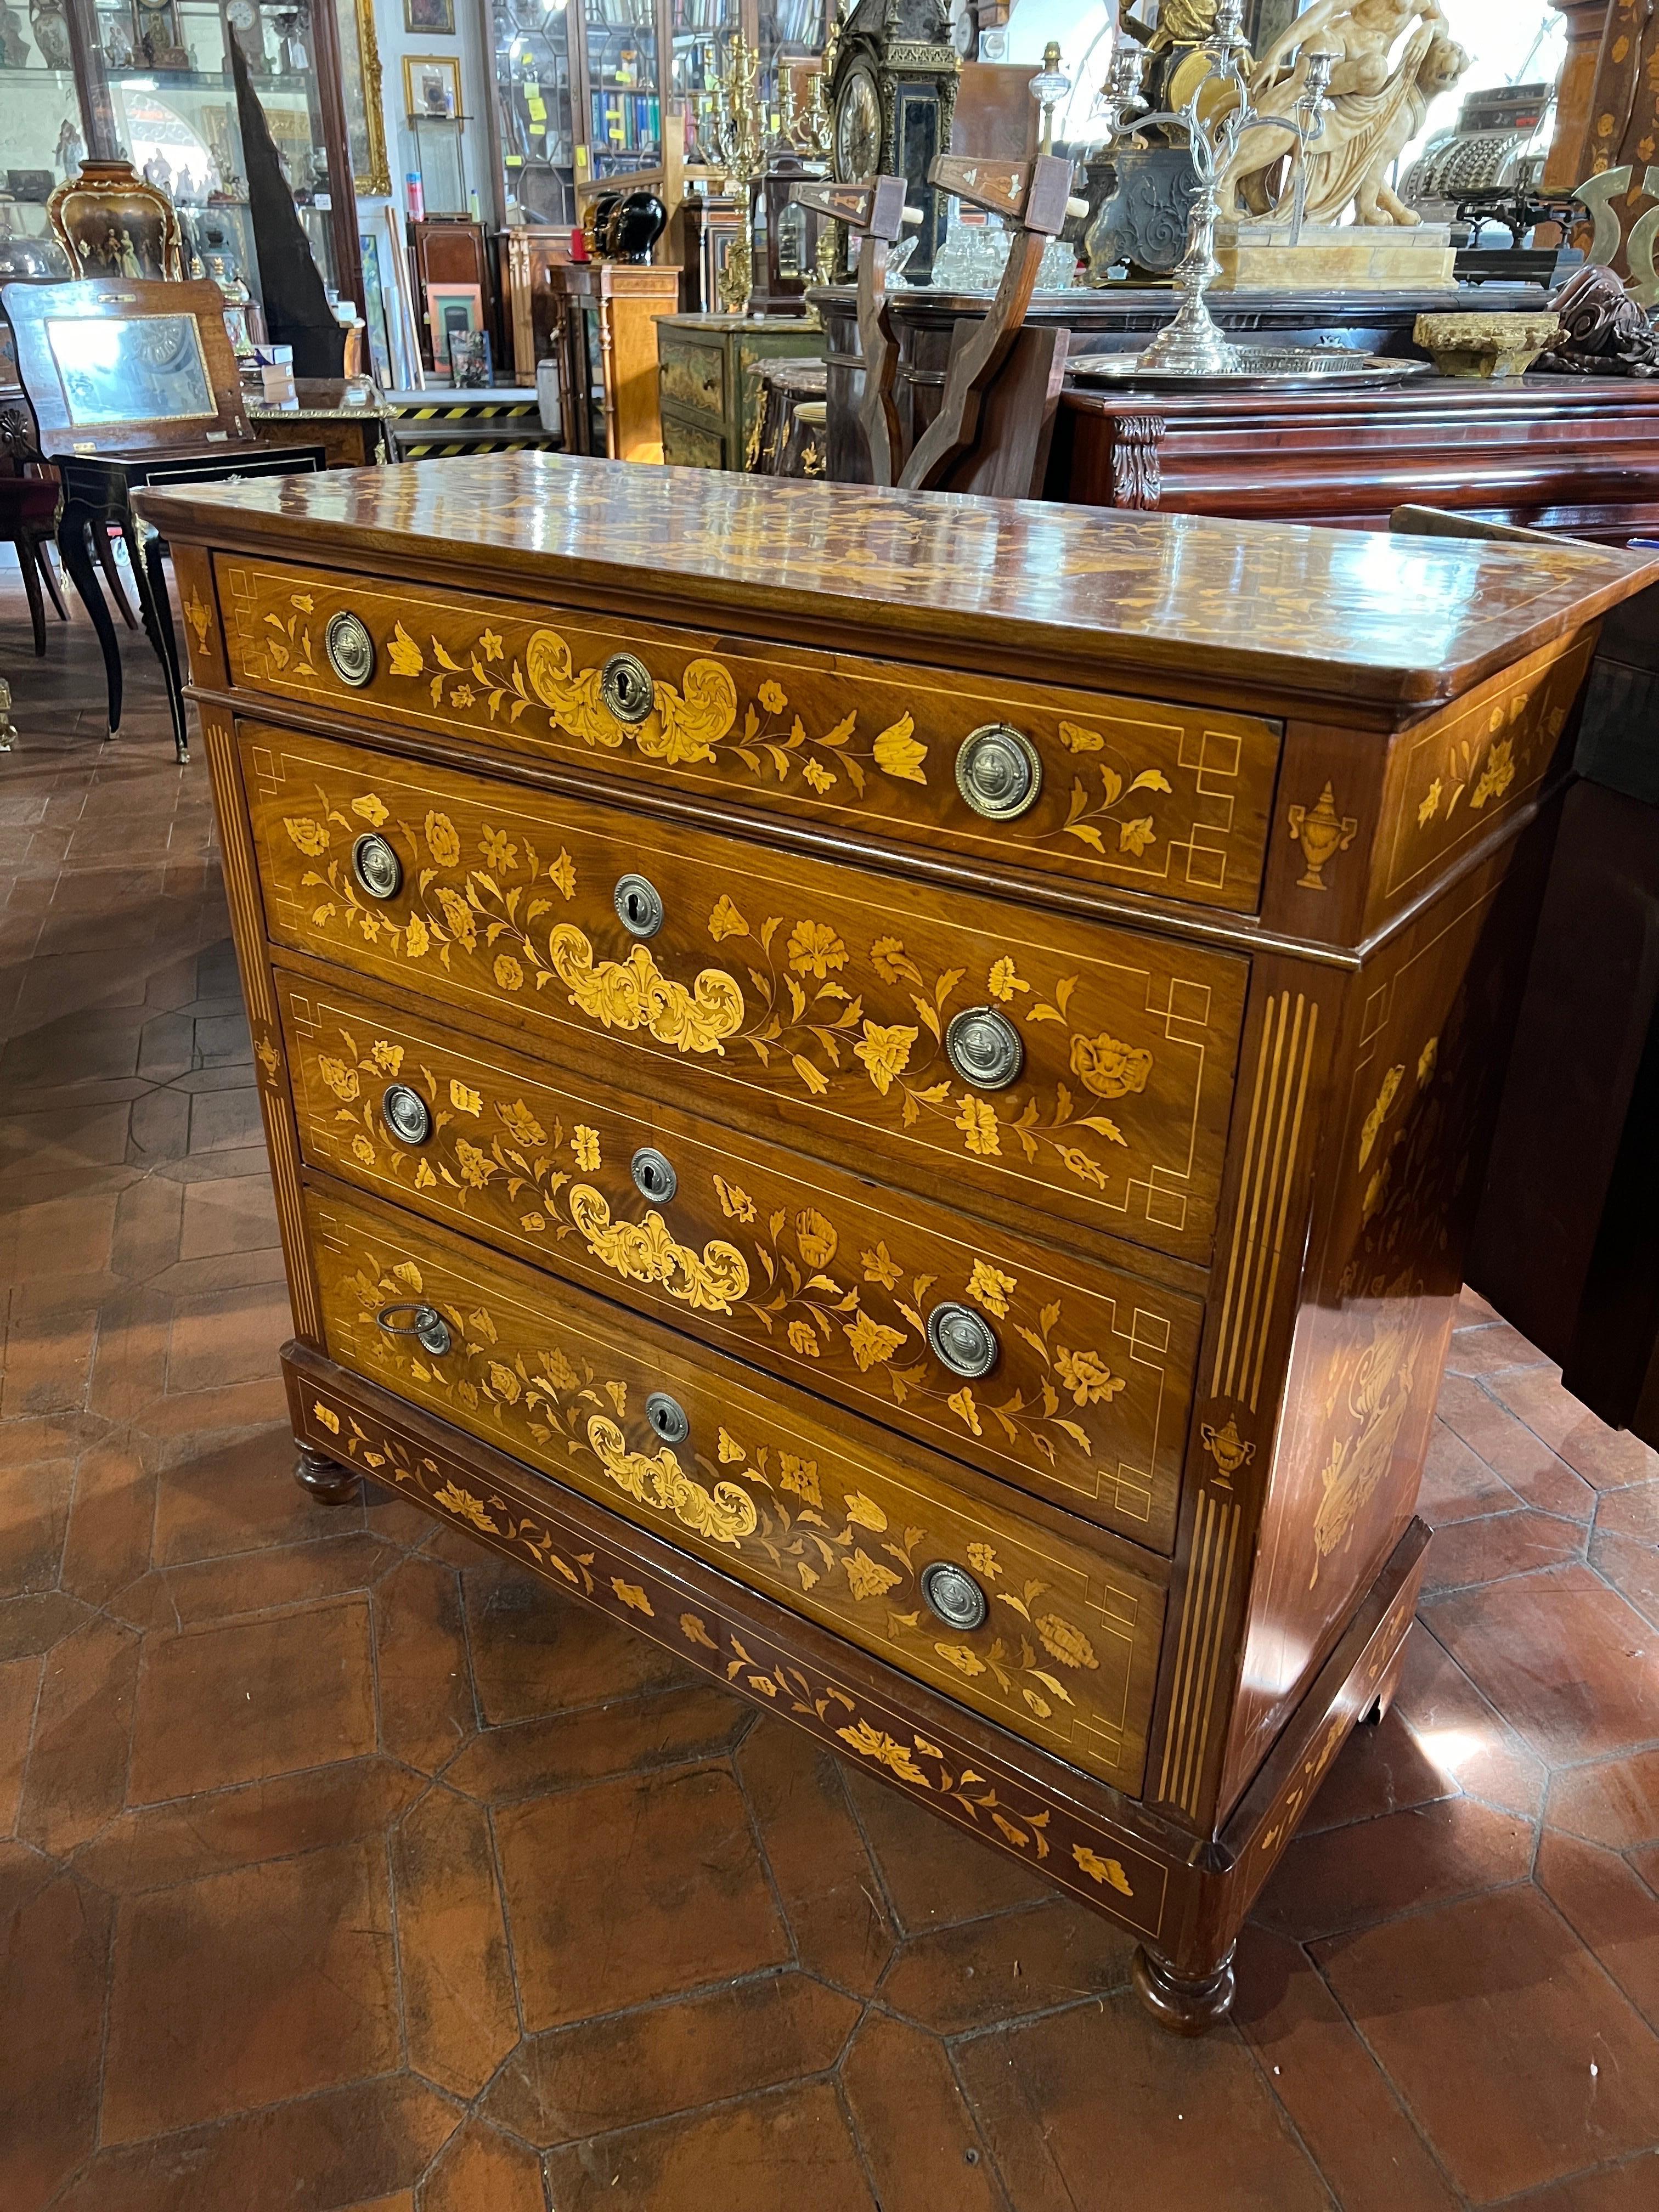 Fantastic Dutch Chest of Drawers , Charles X era , circa 1820, mahogany wood, beautiful wood grain, inlaid with floral motifs, amphorae and butterflies in fruit wood, four drawers and a perfect size for those looking for a shallow yet beautiful and